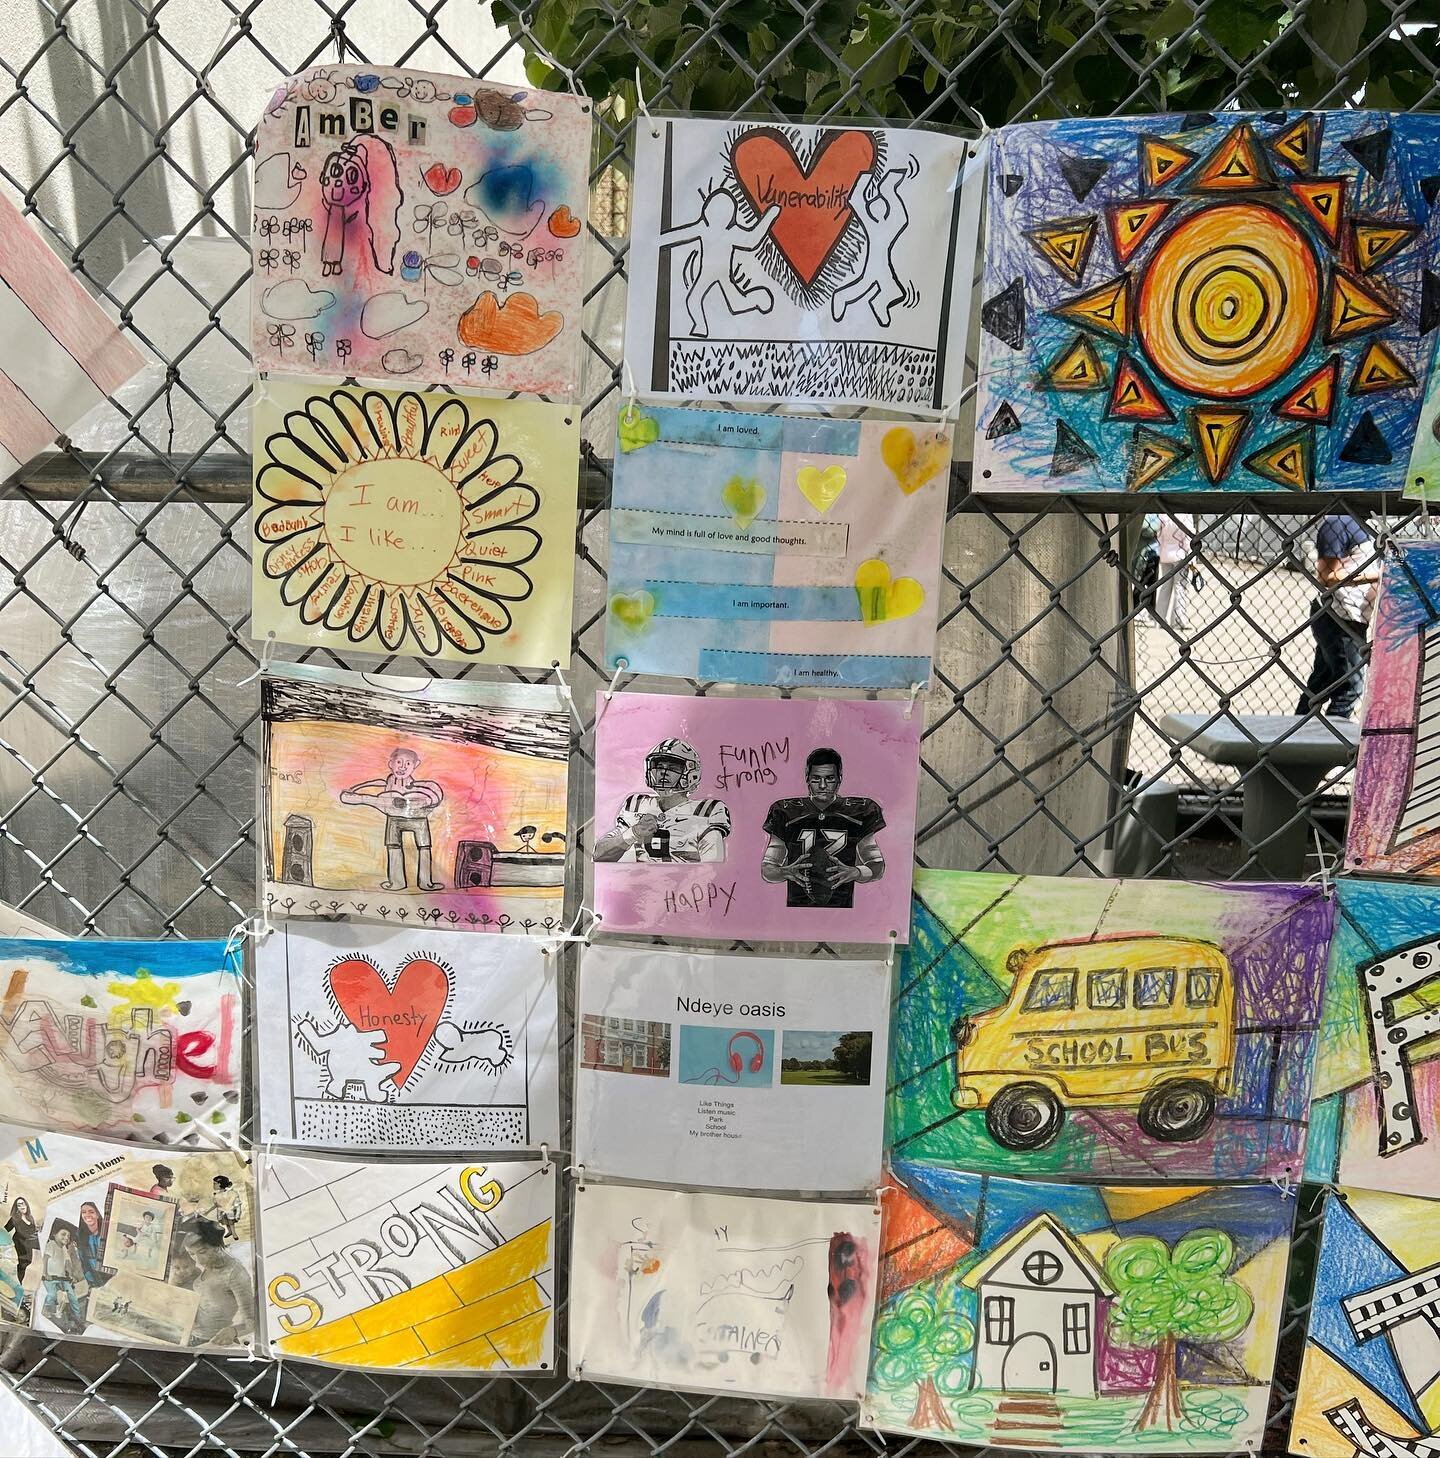 Spotted in the East Village. NYC youth asked to answer &ldquo;I AM&hellip; I LIKE&hellip;&rdquo; I love art by children. So inspiring. So raw. So real.